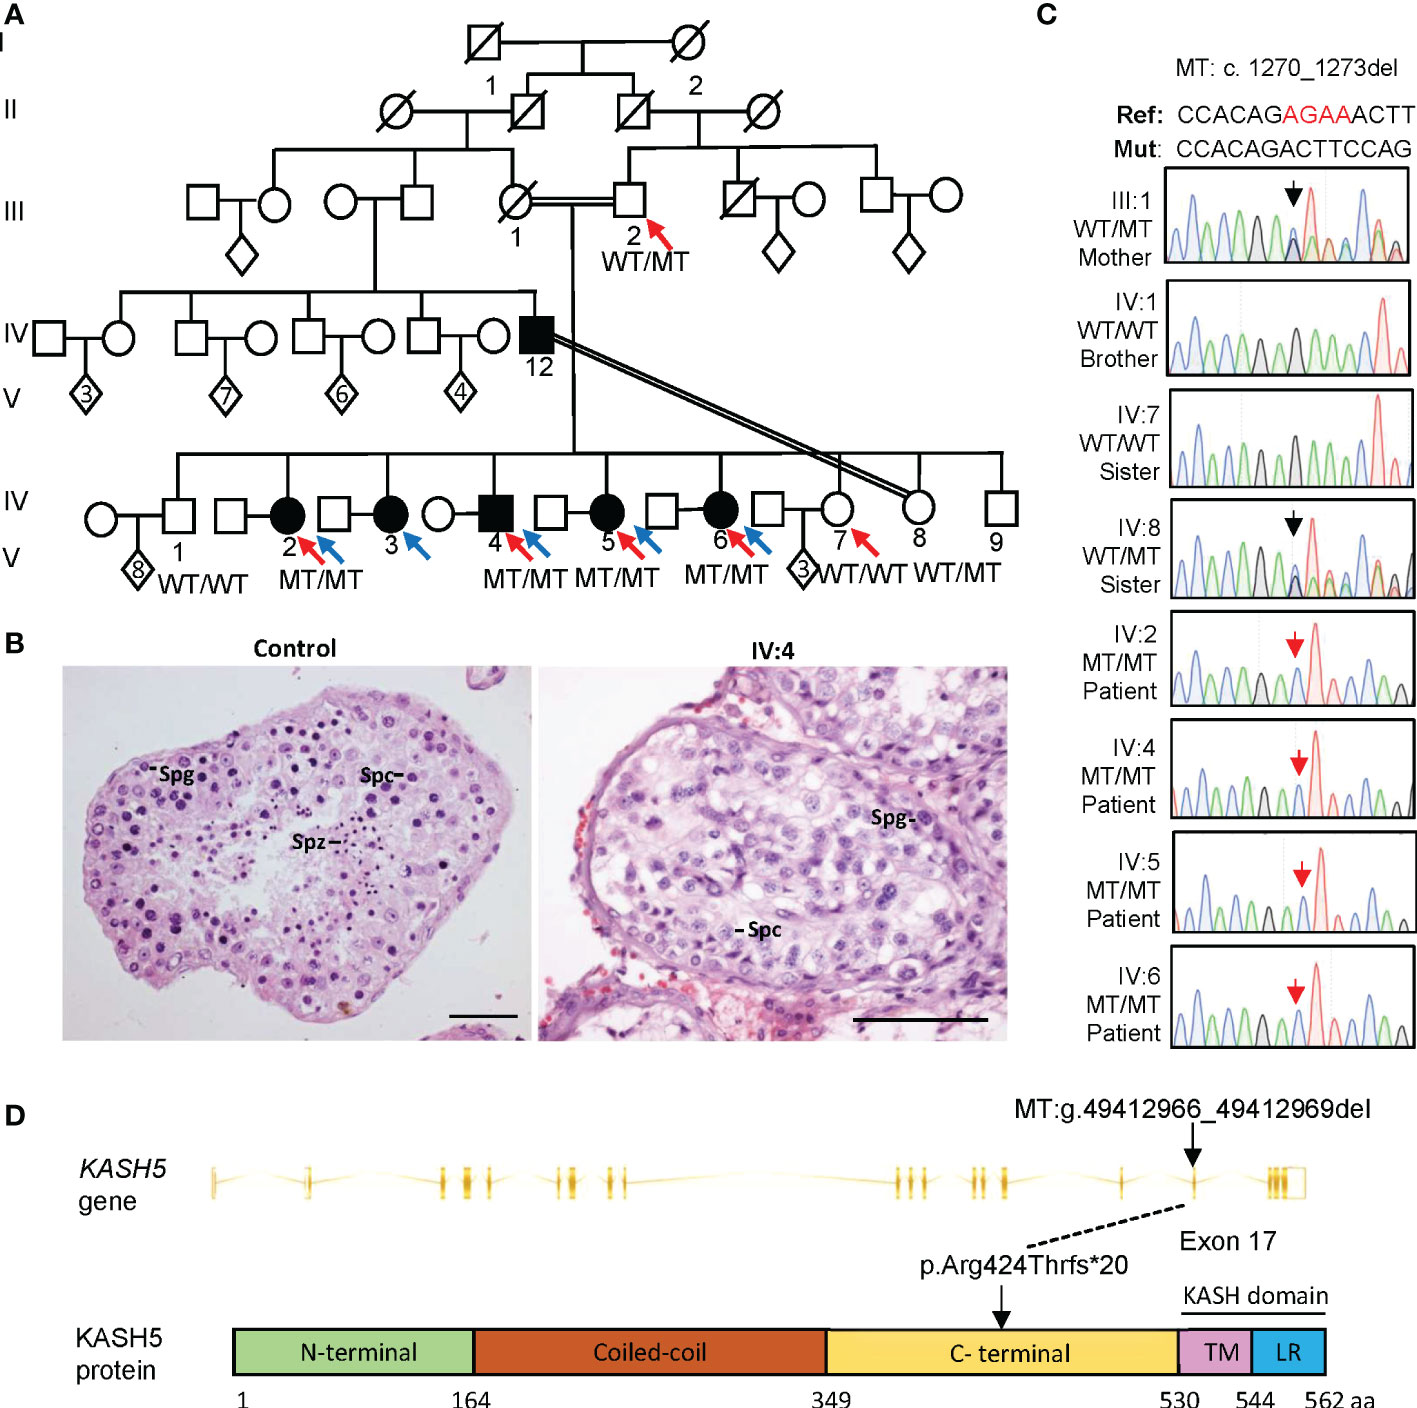 Frontiers  A homozygous KASH5 frameshift mutation causes diminished  ovarian reserve, recurrent miscarriage, and non-obstructive azoospermia in  humans